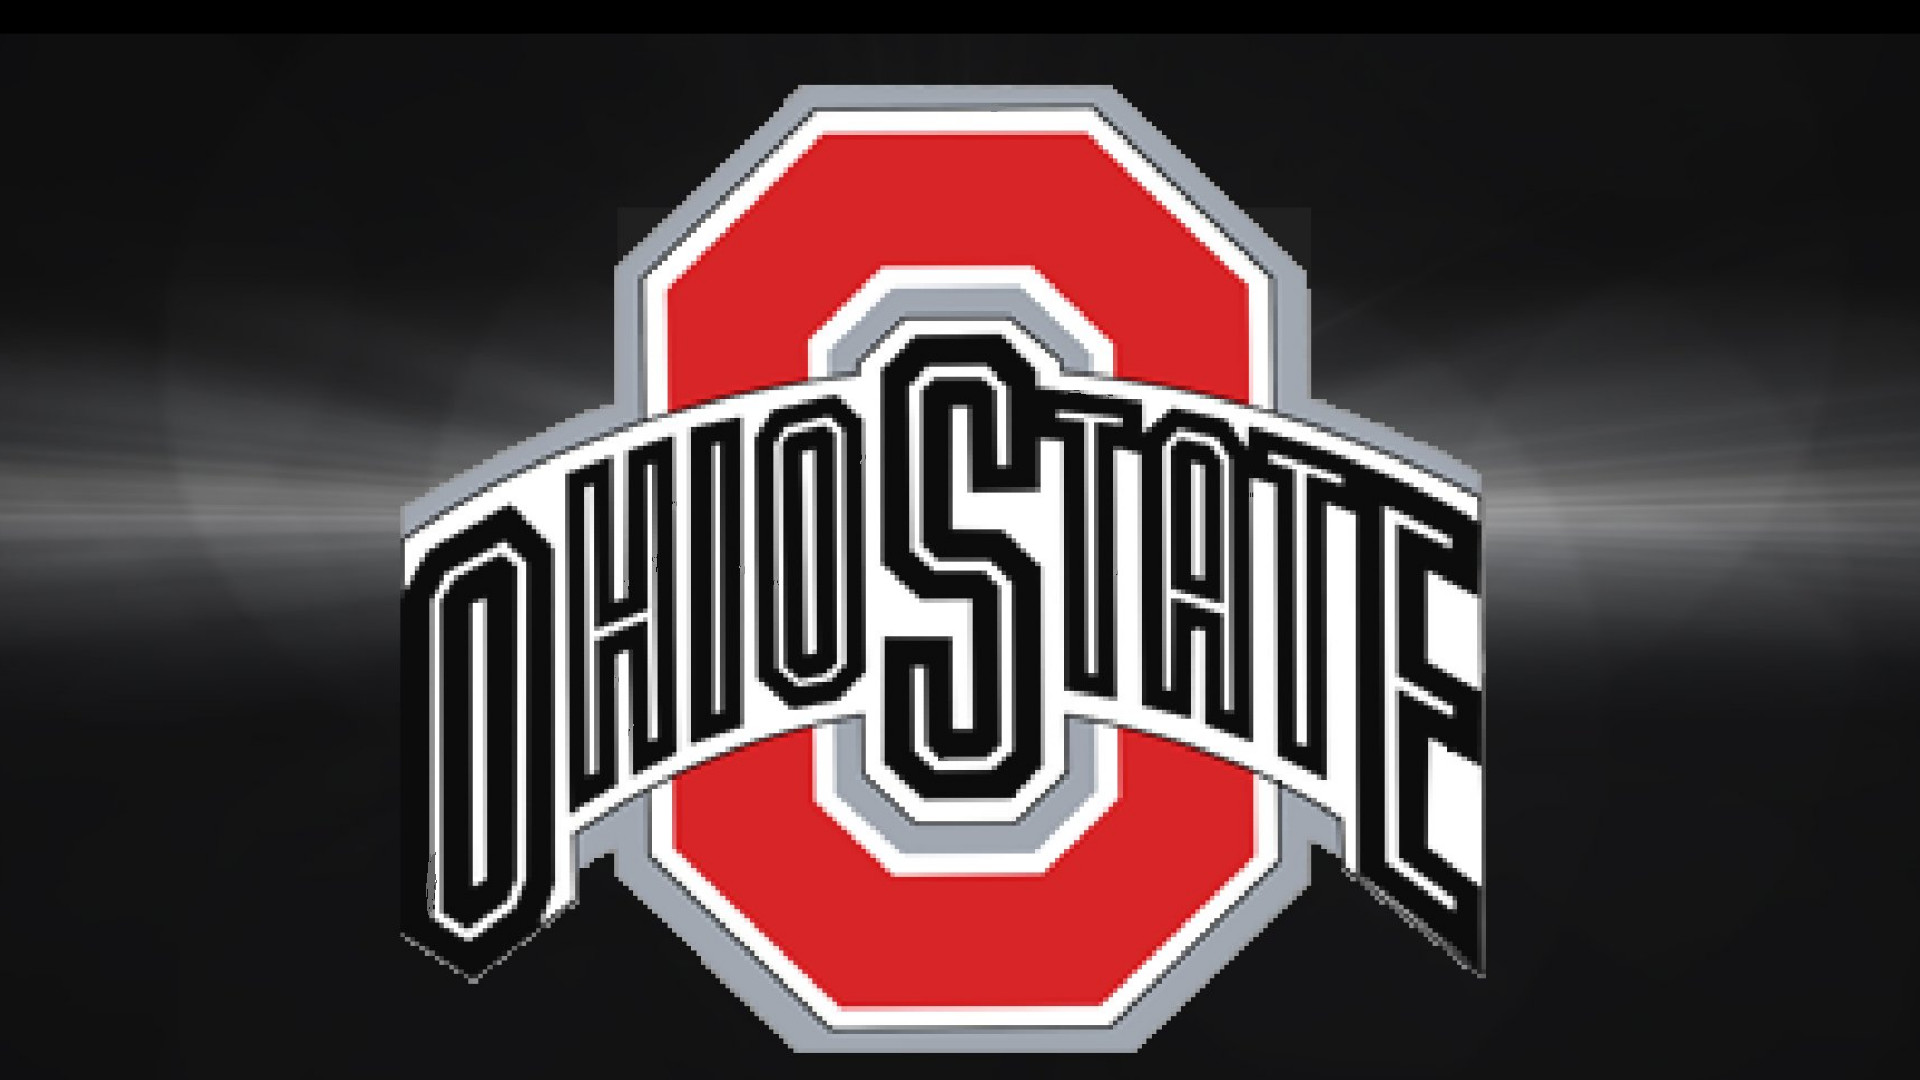 1920x1080 Ohio State Buckeyes Backgrounds - Wallpaper Cave